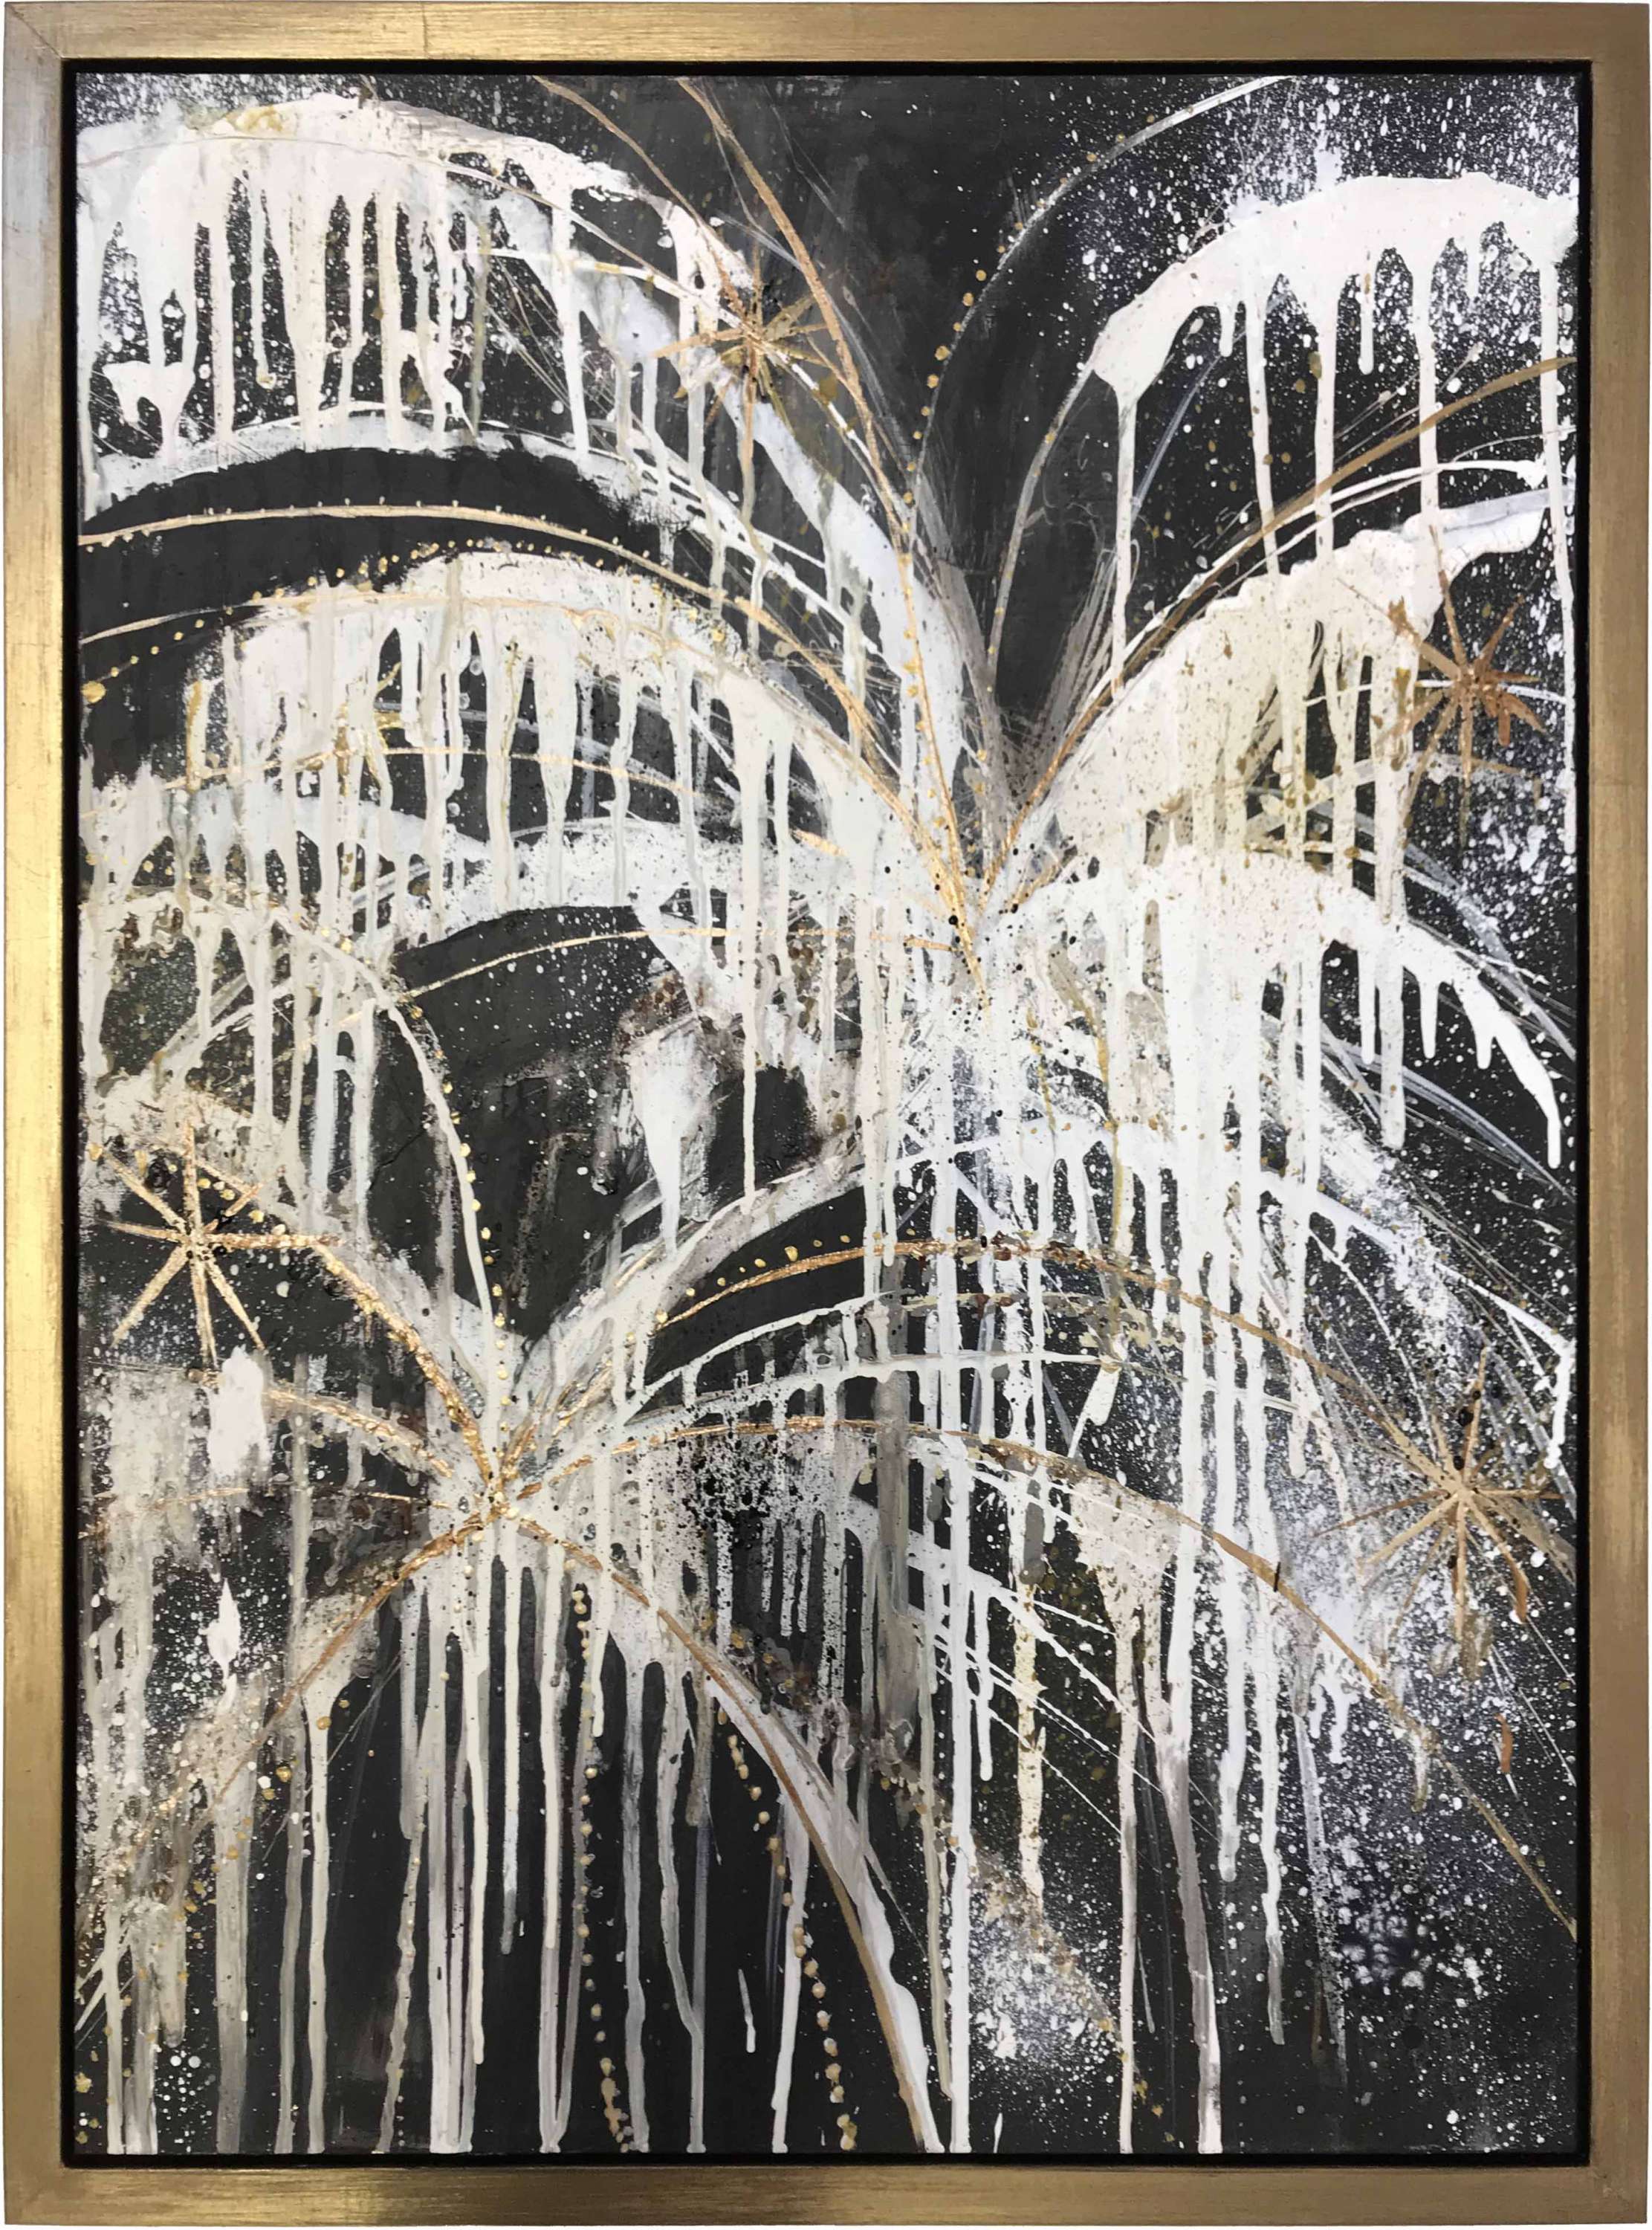 PAIR ‘Fireworks Diptych’ Oil & Acrylic on Board in Gold Gilt & Bronze Finish Shadow Gap Tray Frame